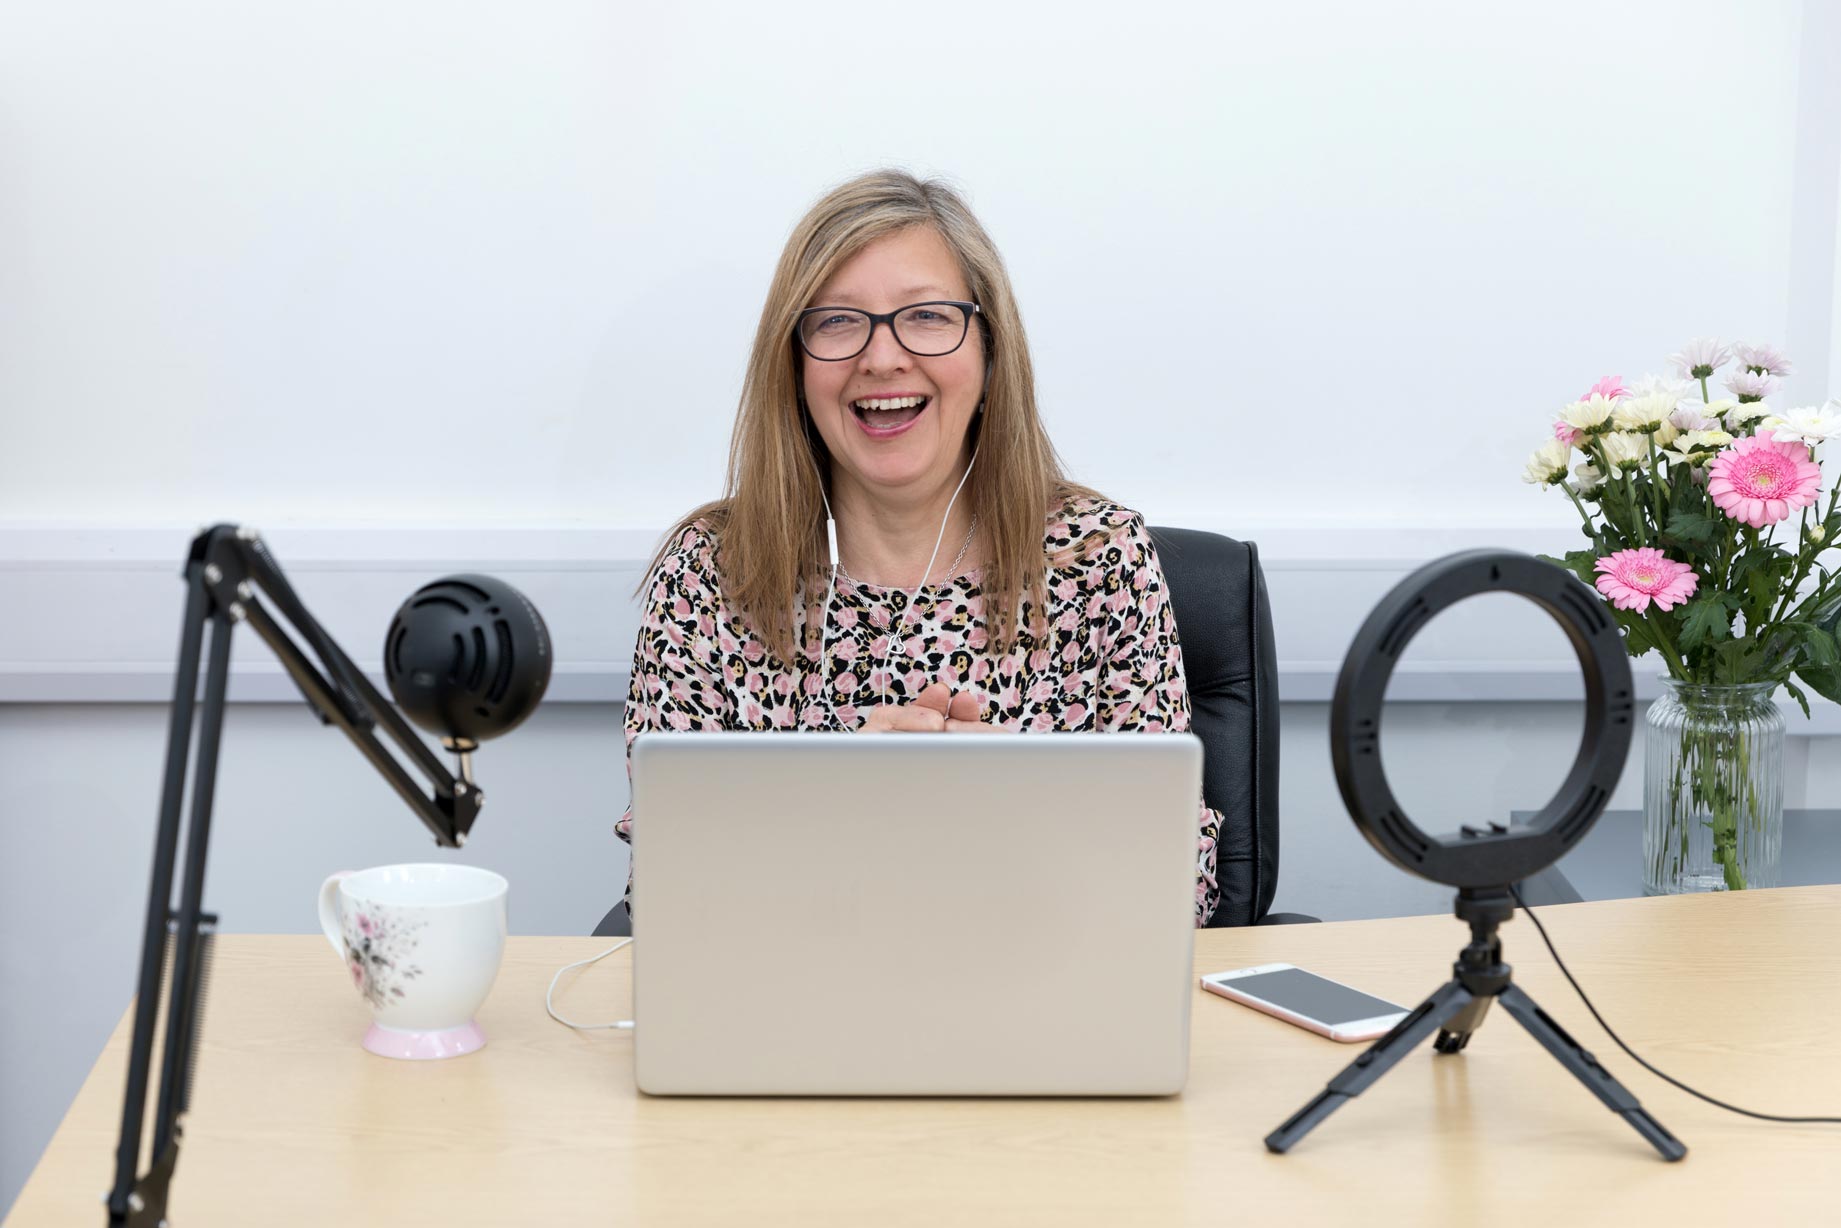 A woman recording her podcast during her personal branding photography shoot in Croydon